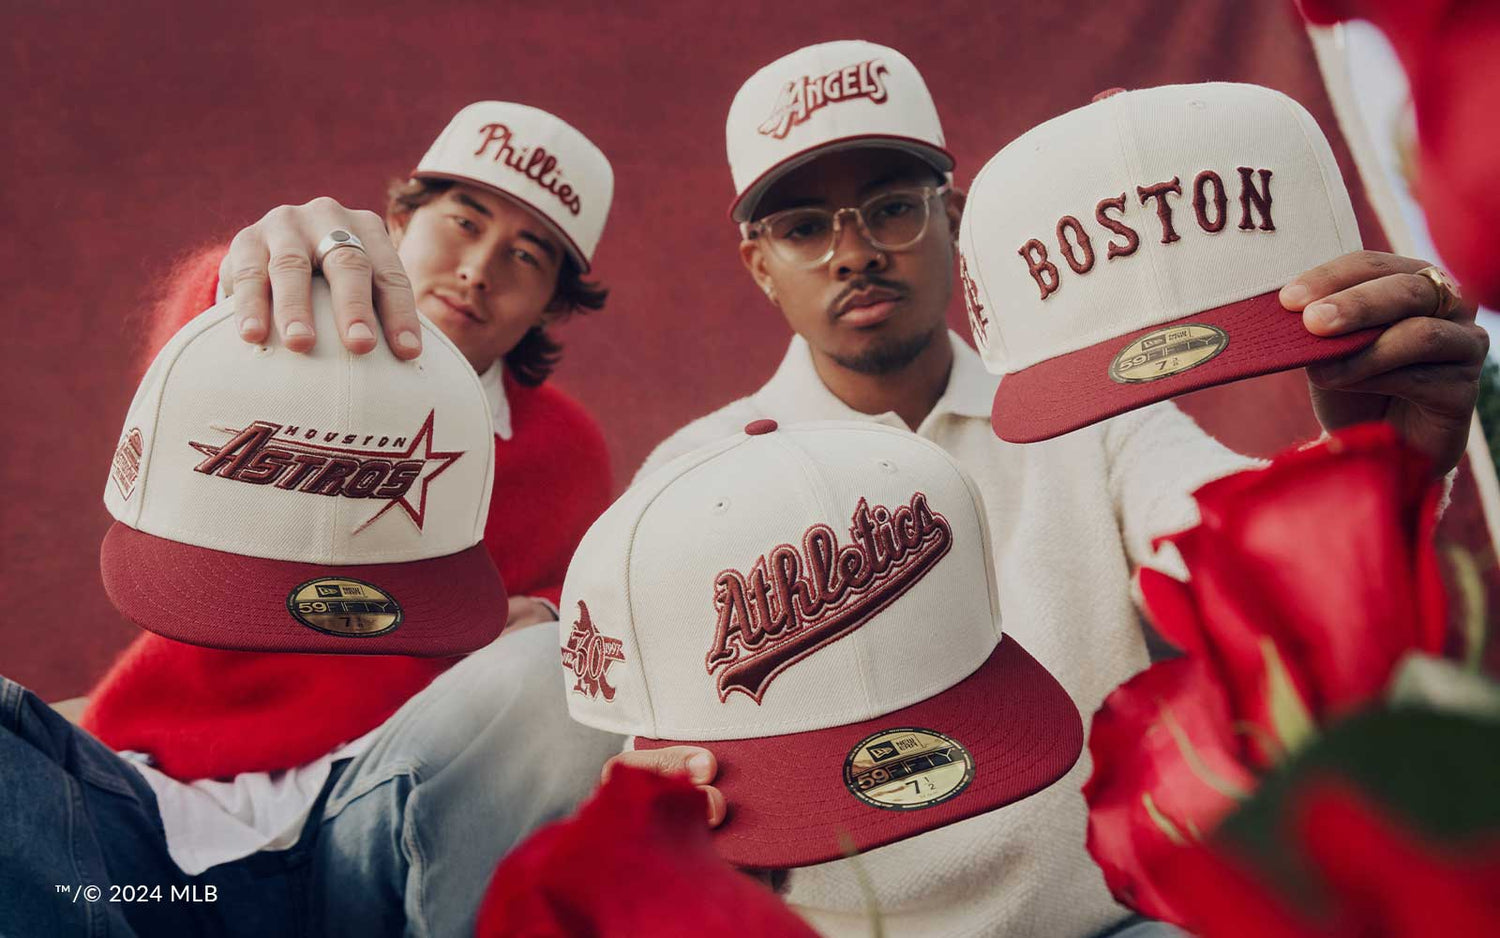 Alpha Industries, New Era Collaborate on Baseball-themed Capsule